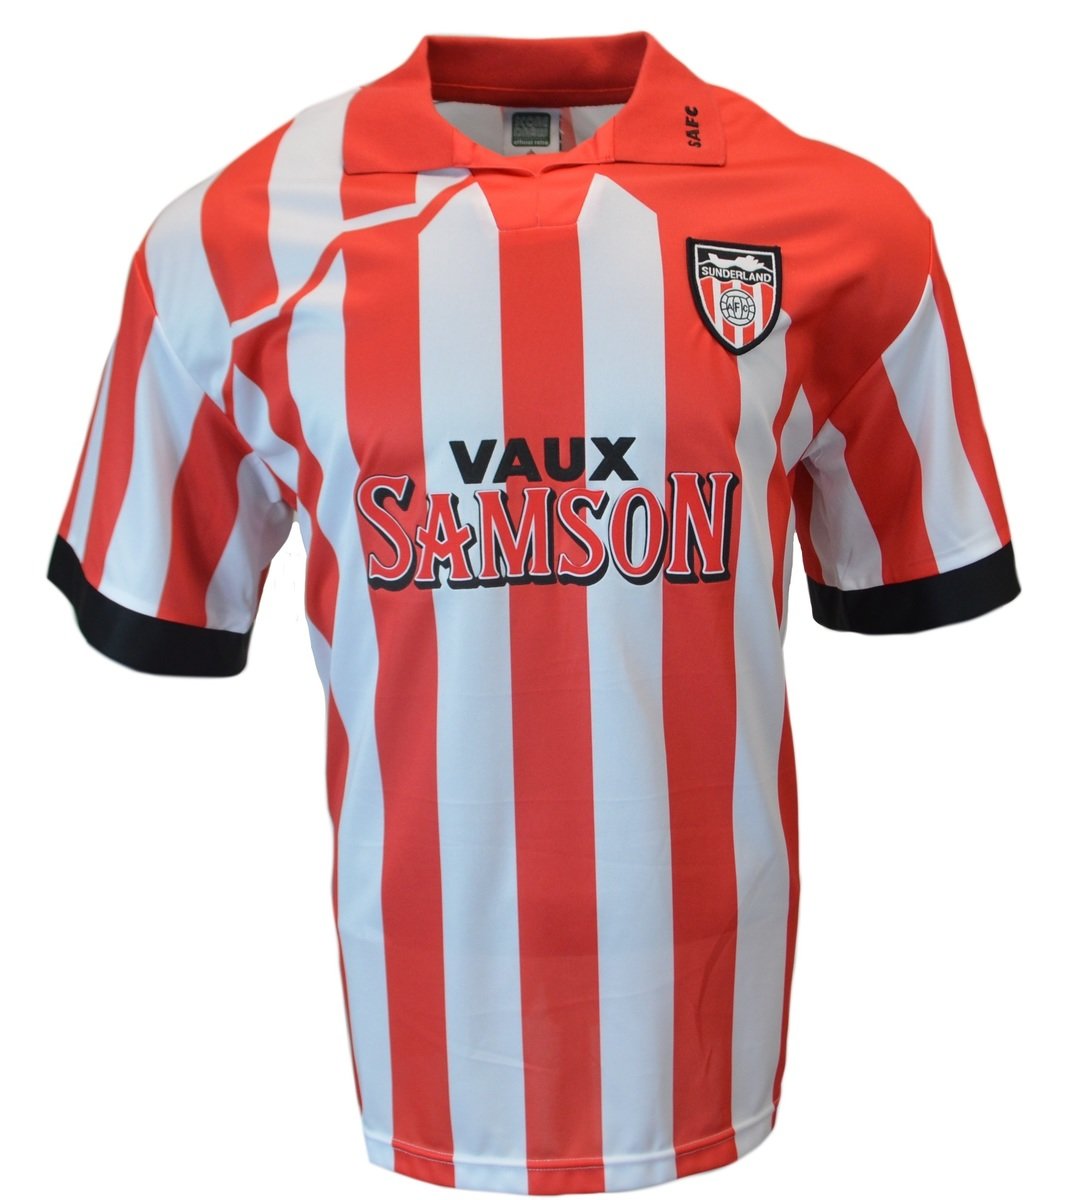 Buy the SAFC 1994 Home Shirt online at Sunderland AFC Store